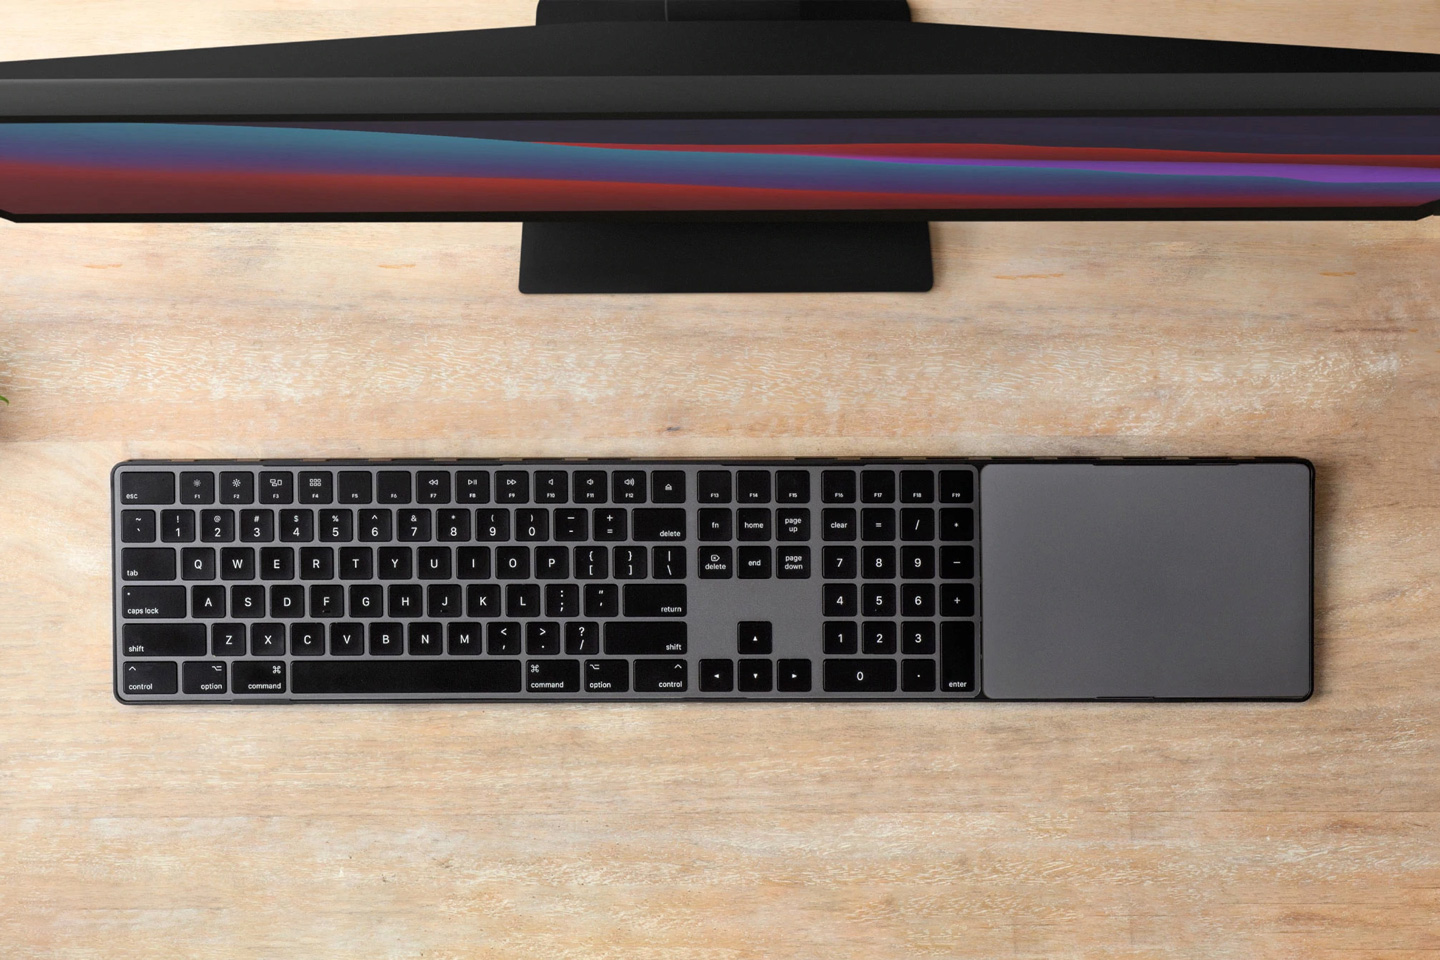 #The Magic Bridge merges your Apple Keyboard and Trackpad into one ‘super-keyboard’